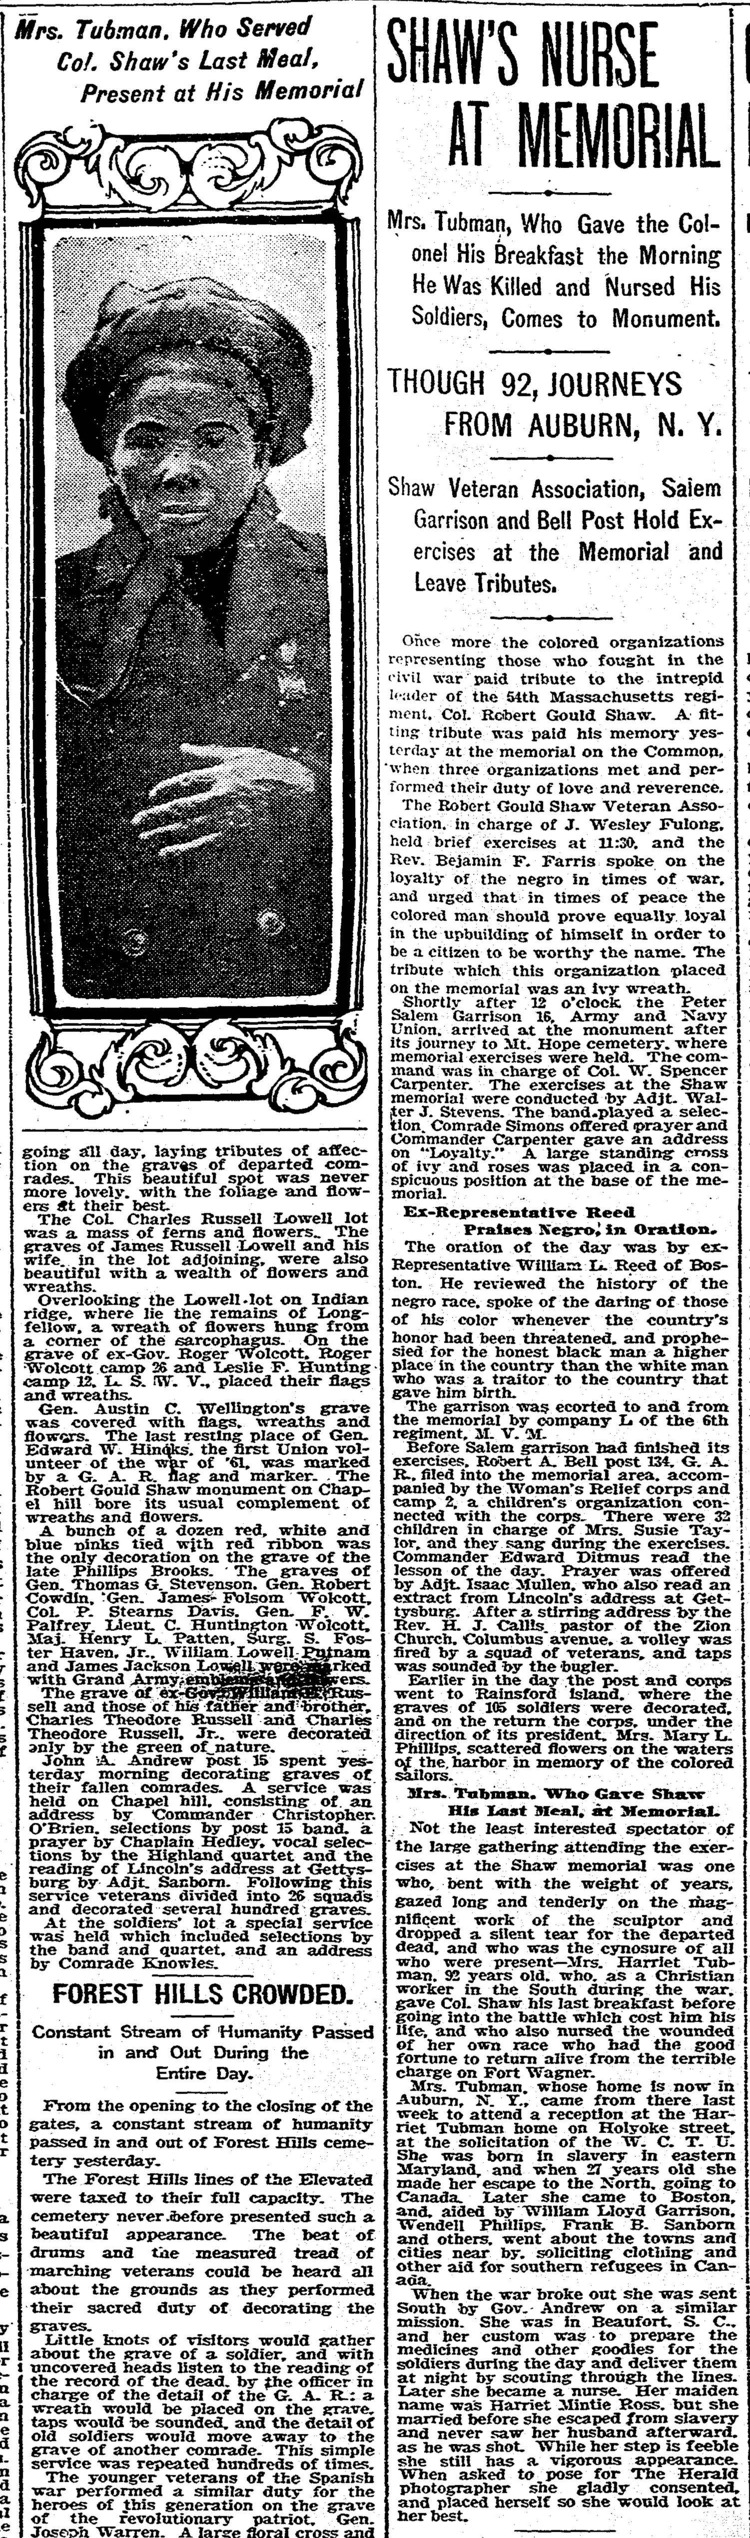 Newspaper article titled "Shaw's Nurse at Memorial" with a portrait of Harriet Tubman.